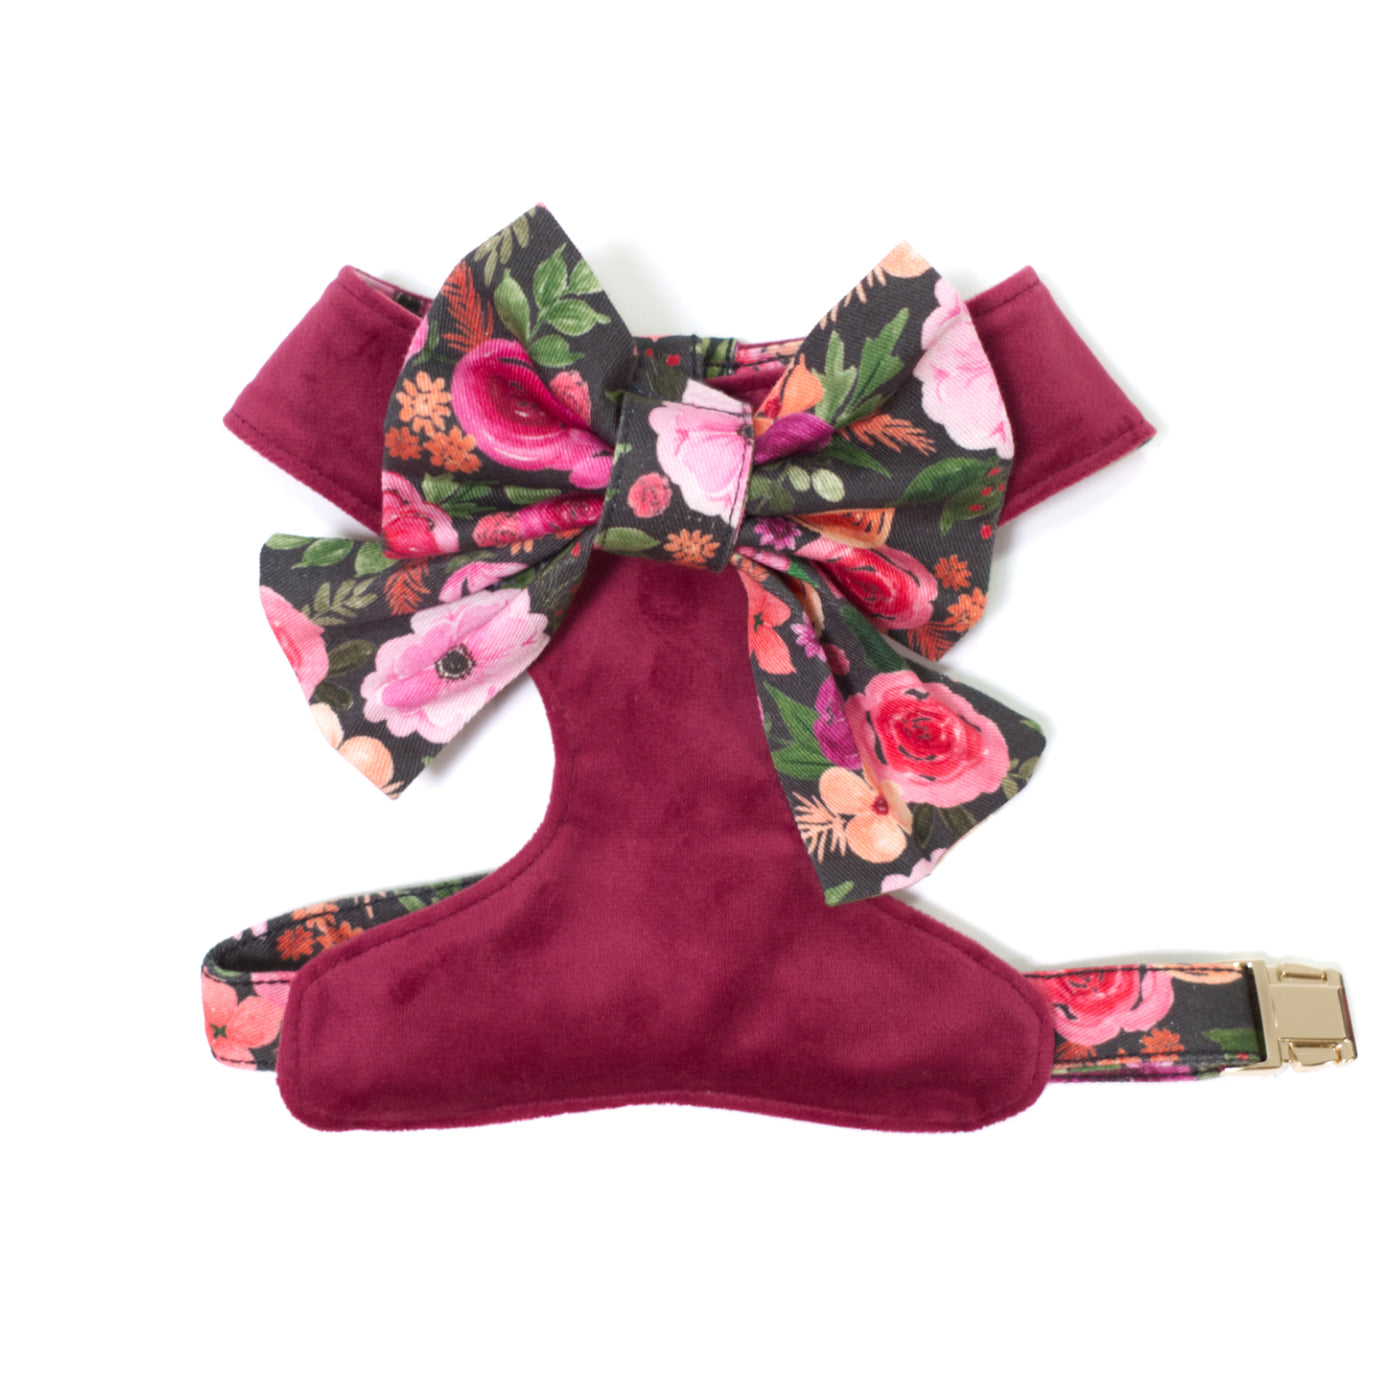 Reversible dog harness in wine velvet with floral sailor bow shown in size XS